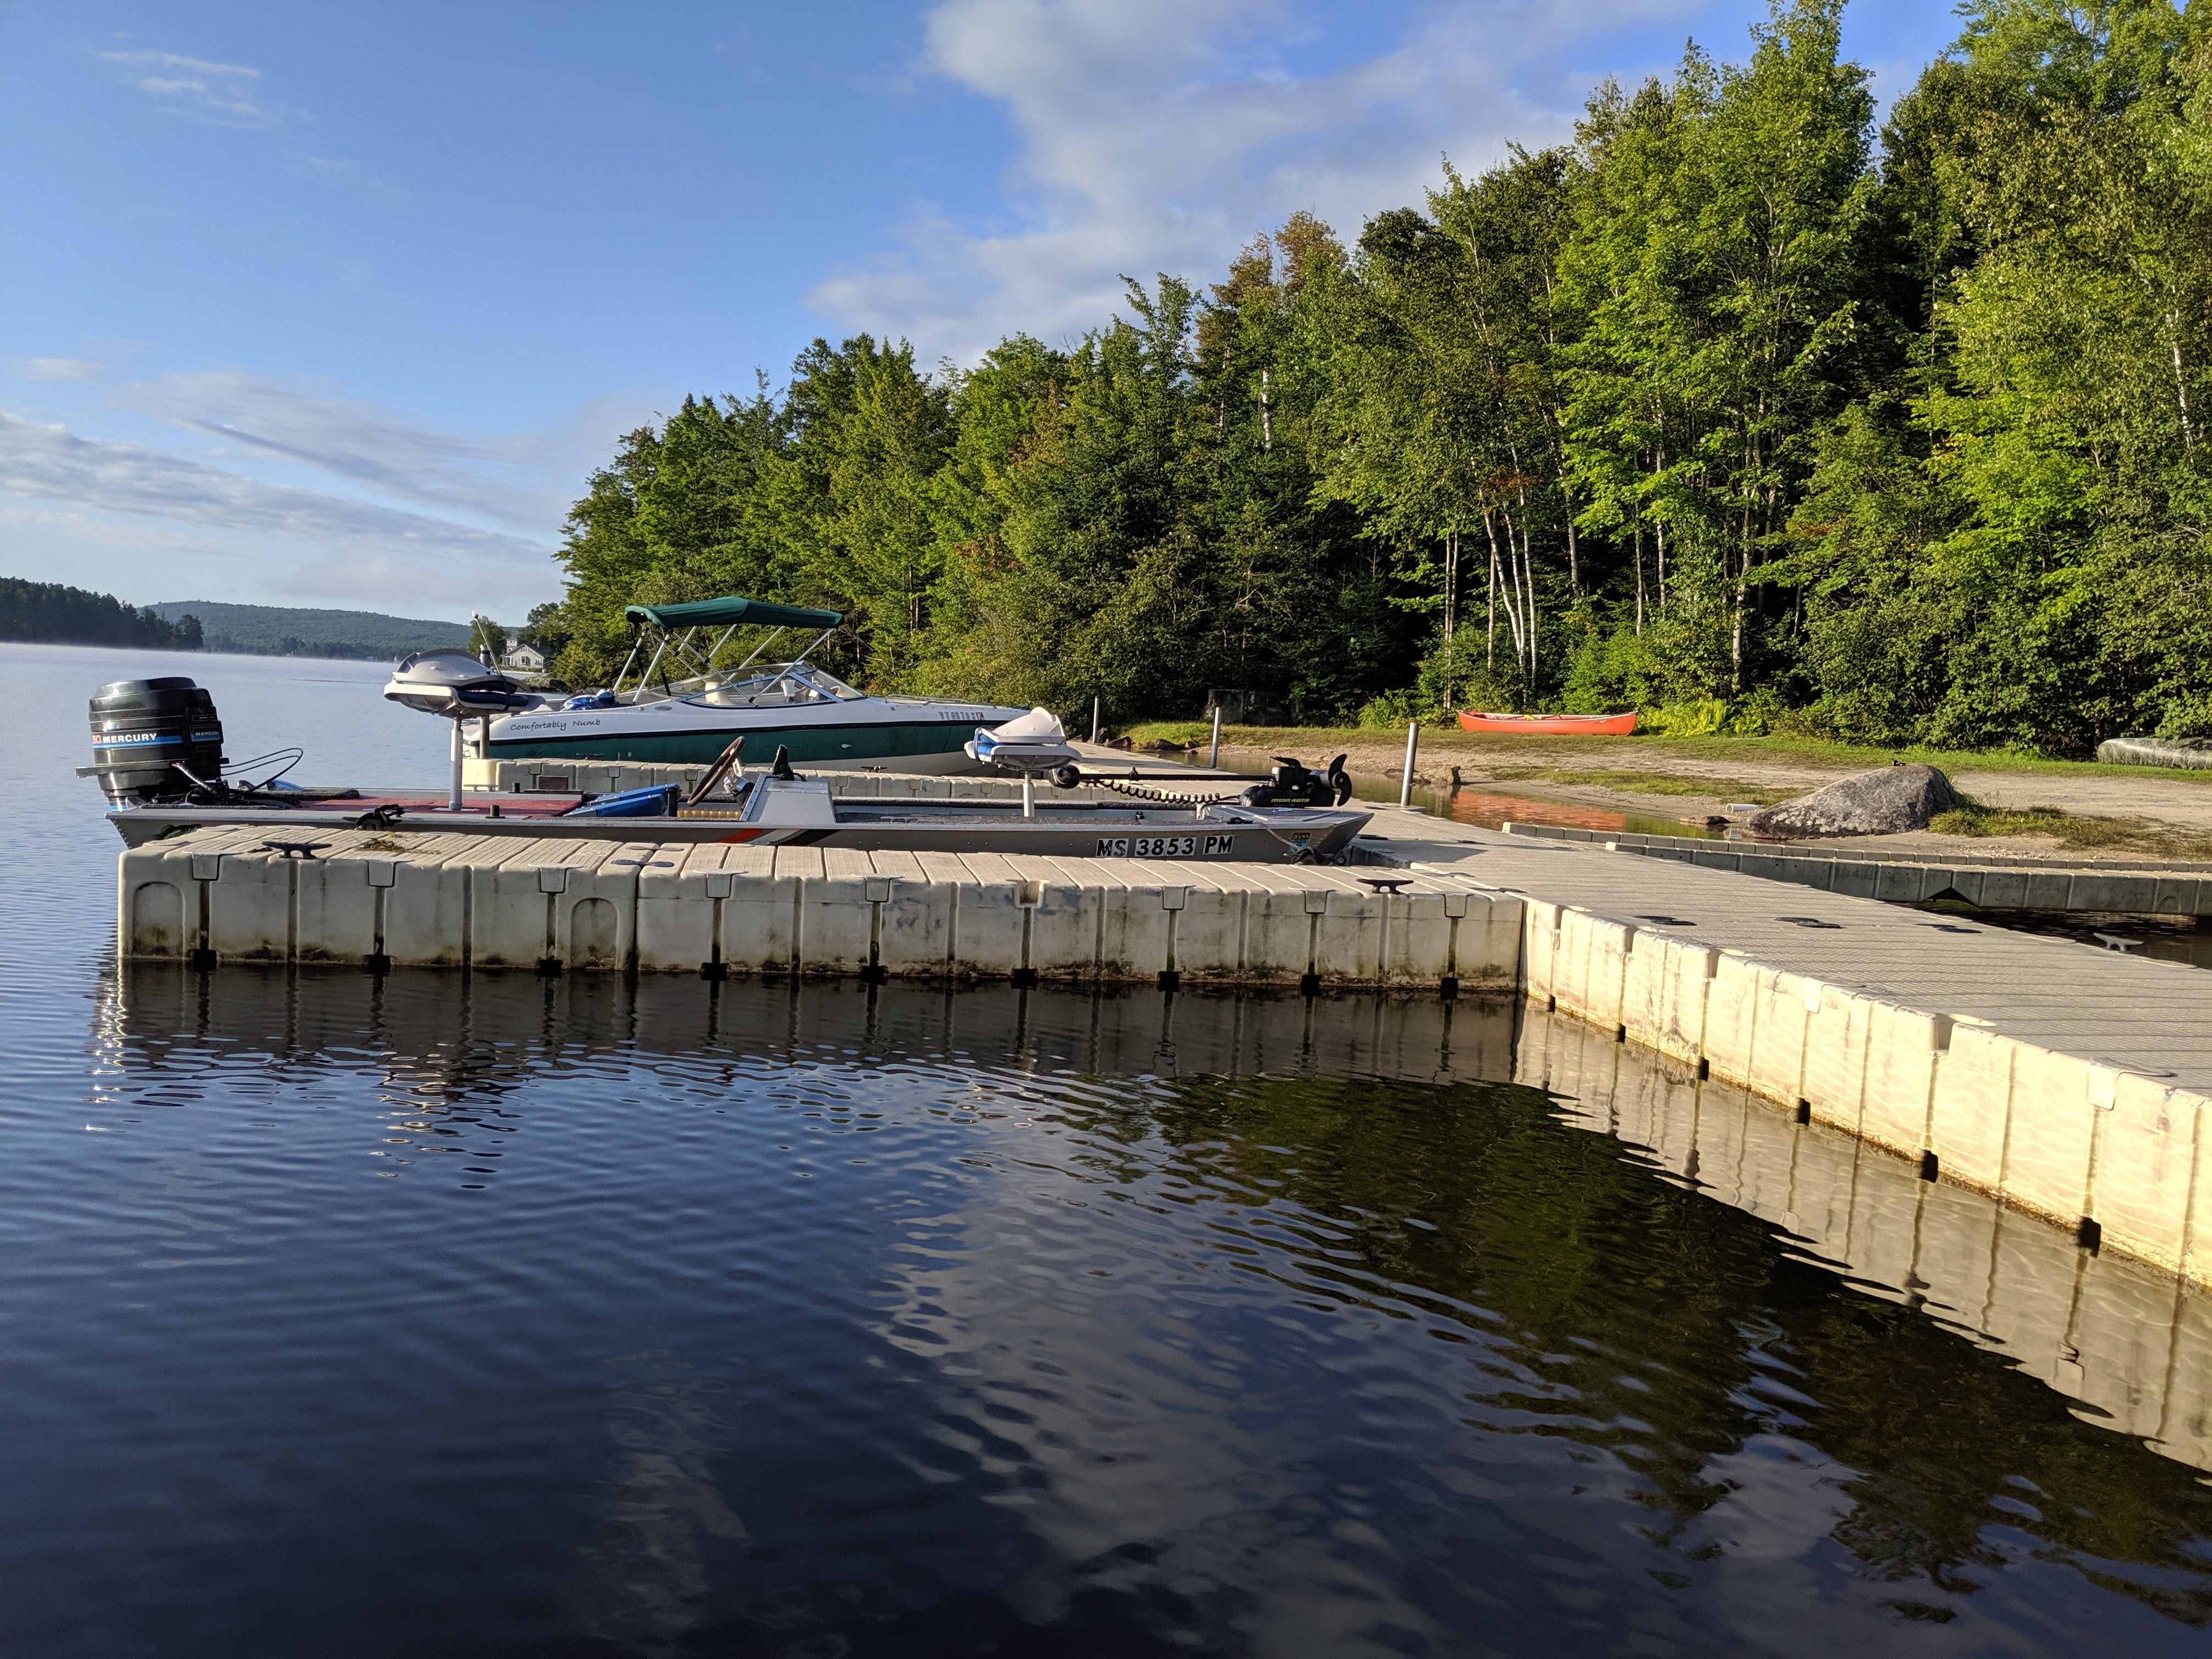 Docks at the marina for campers